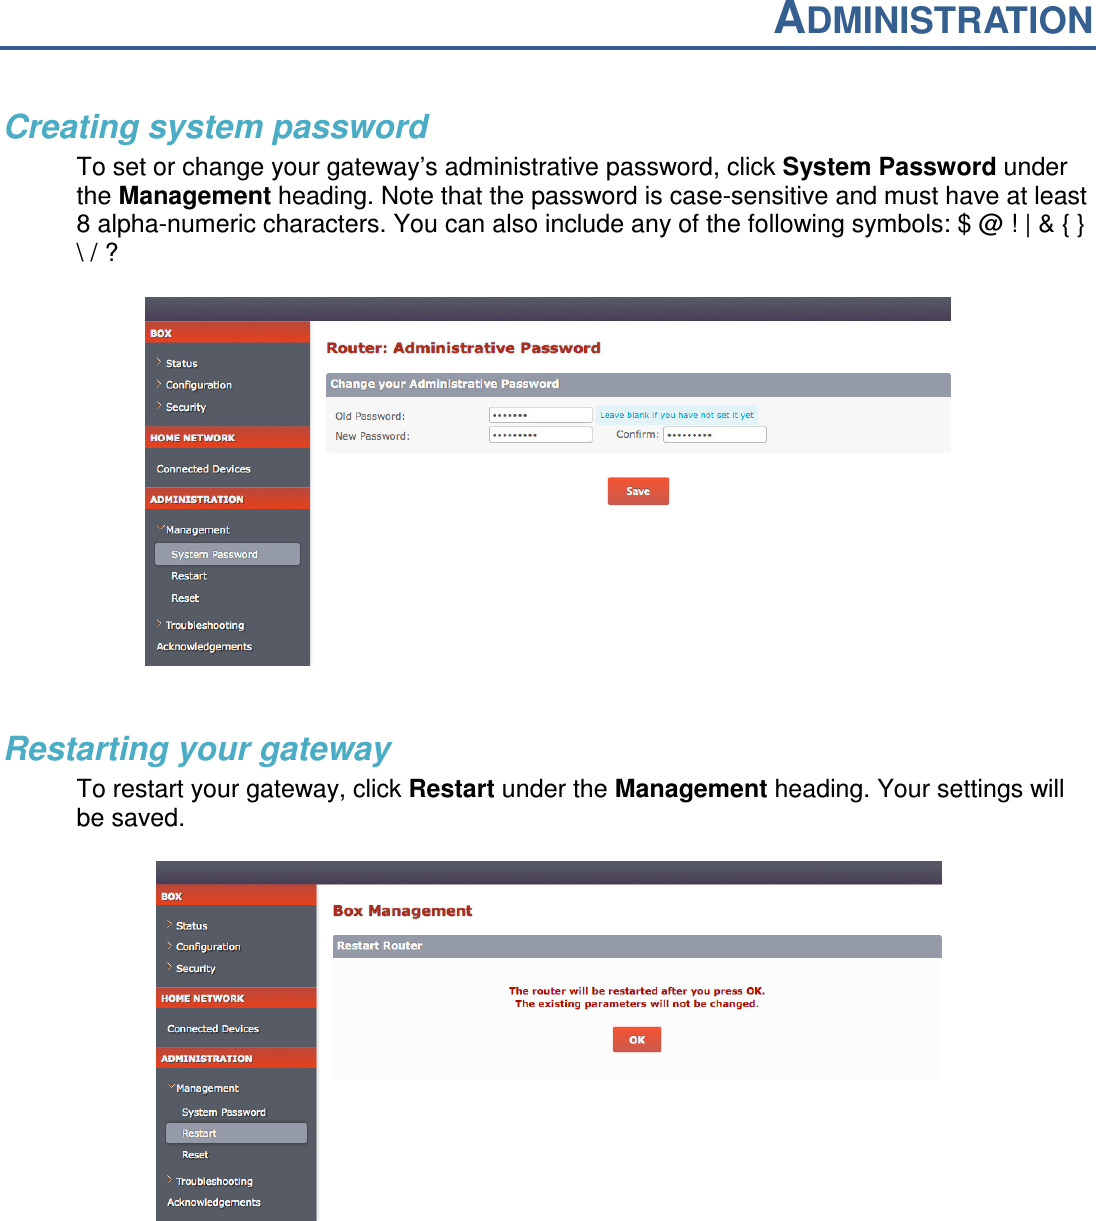 ADMINISTRATION  Creating system password To set or change your gateway’s administrative password, click System Password under the Management heading. Note that the password is case-sensitive and must have at least 8 alpha-numeric characters. You can also include any of the following symbols: $ @ ! | &amp; { } \ / ?    Restarting your gateway To restart your gateway, click Restart under the Management heading. Your settings will be saved.      